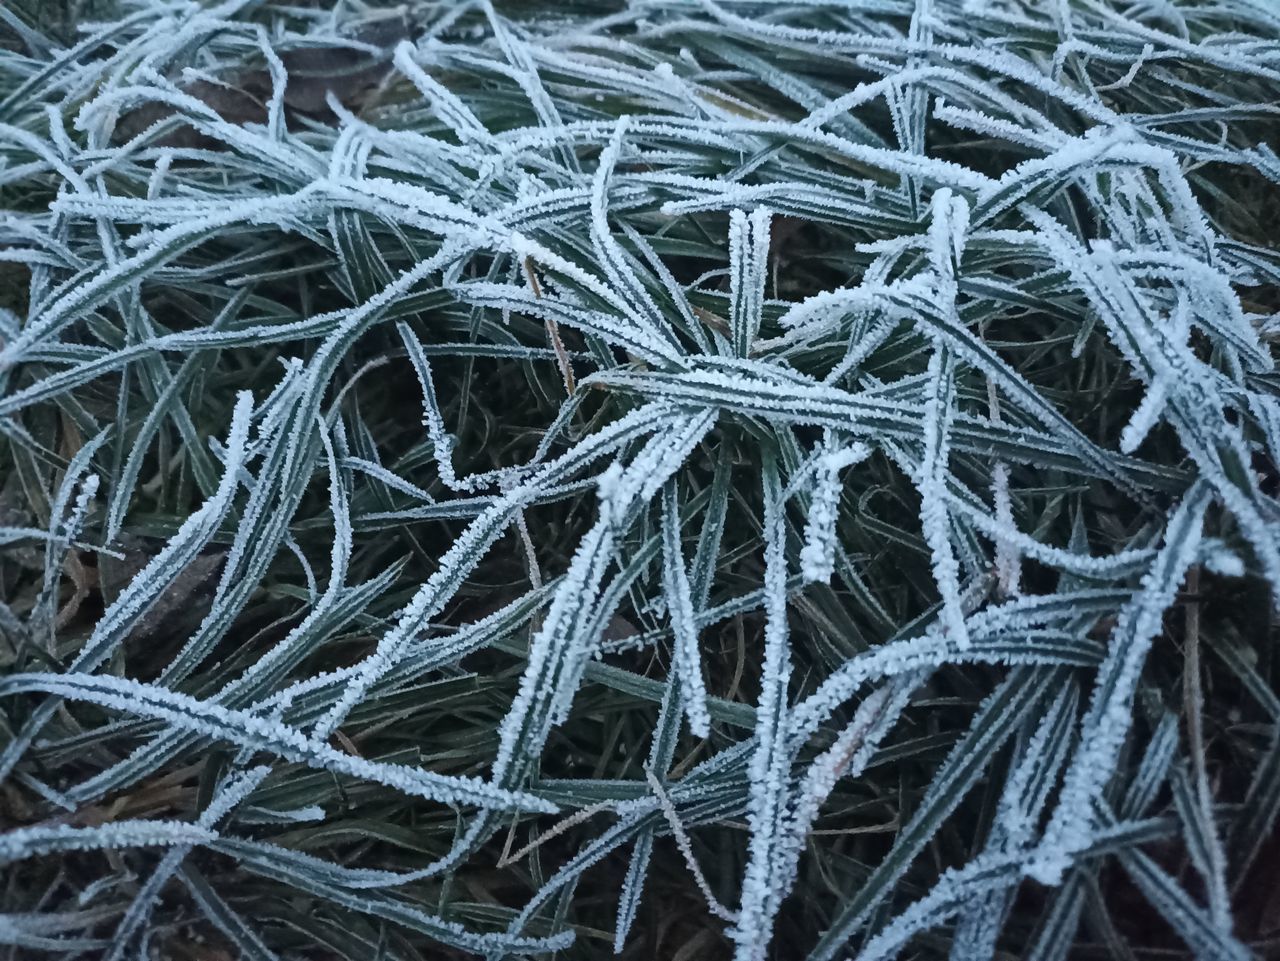 frost, branch, backgrounds, full frame, twig, no people, ice, close-up, winter, cold temperature, plant, grass, leaf, nature, freezing, frozen, day, tree, snow, pattern, complexity